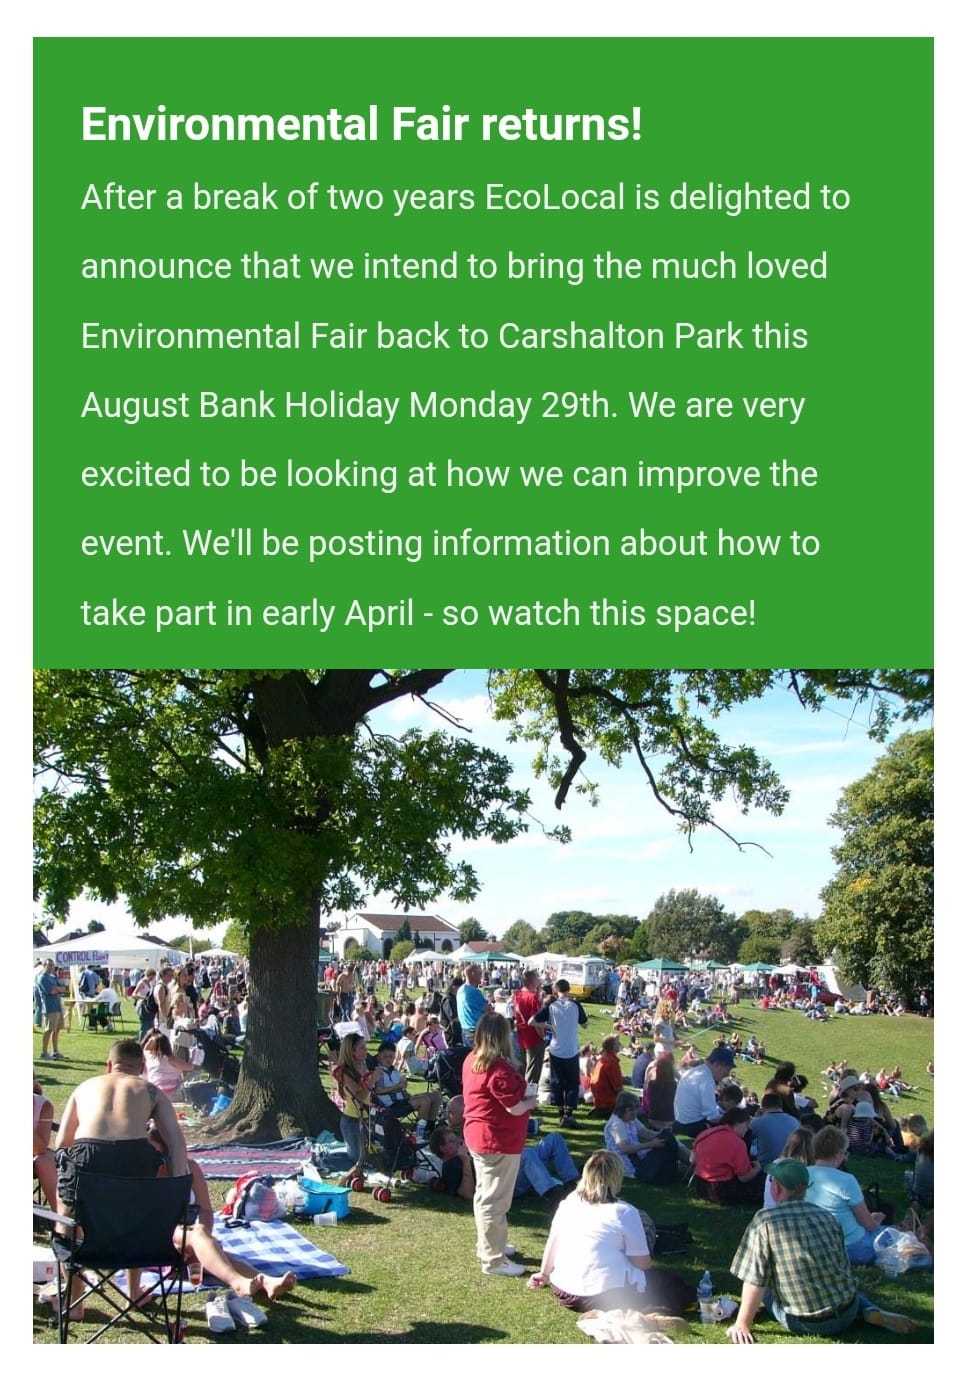 Environmental Fair is back! August Bank Holiday